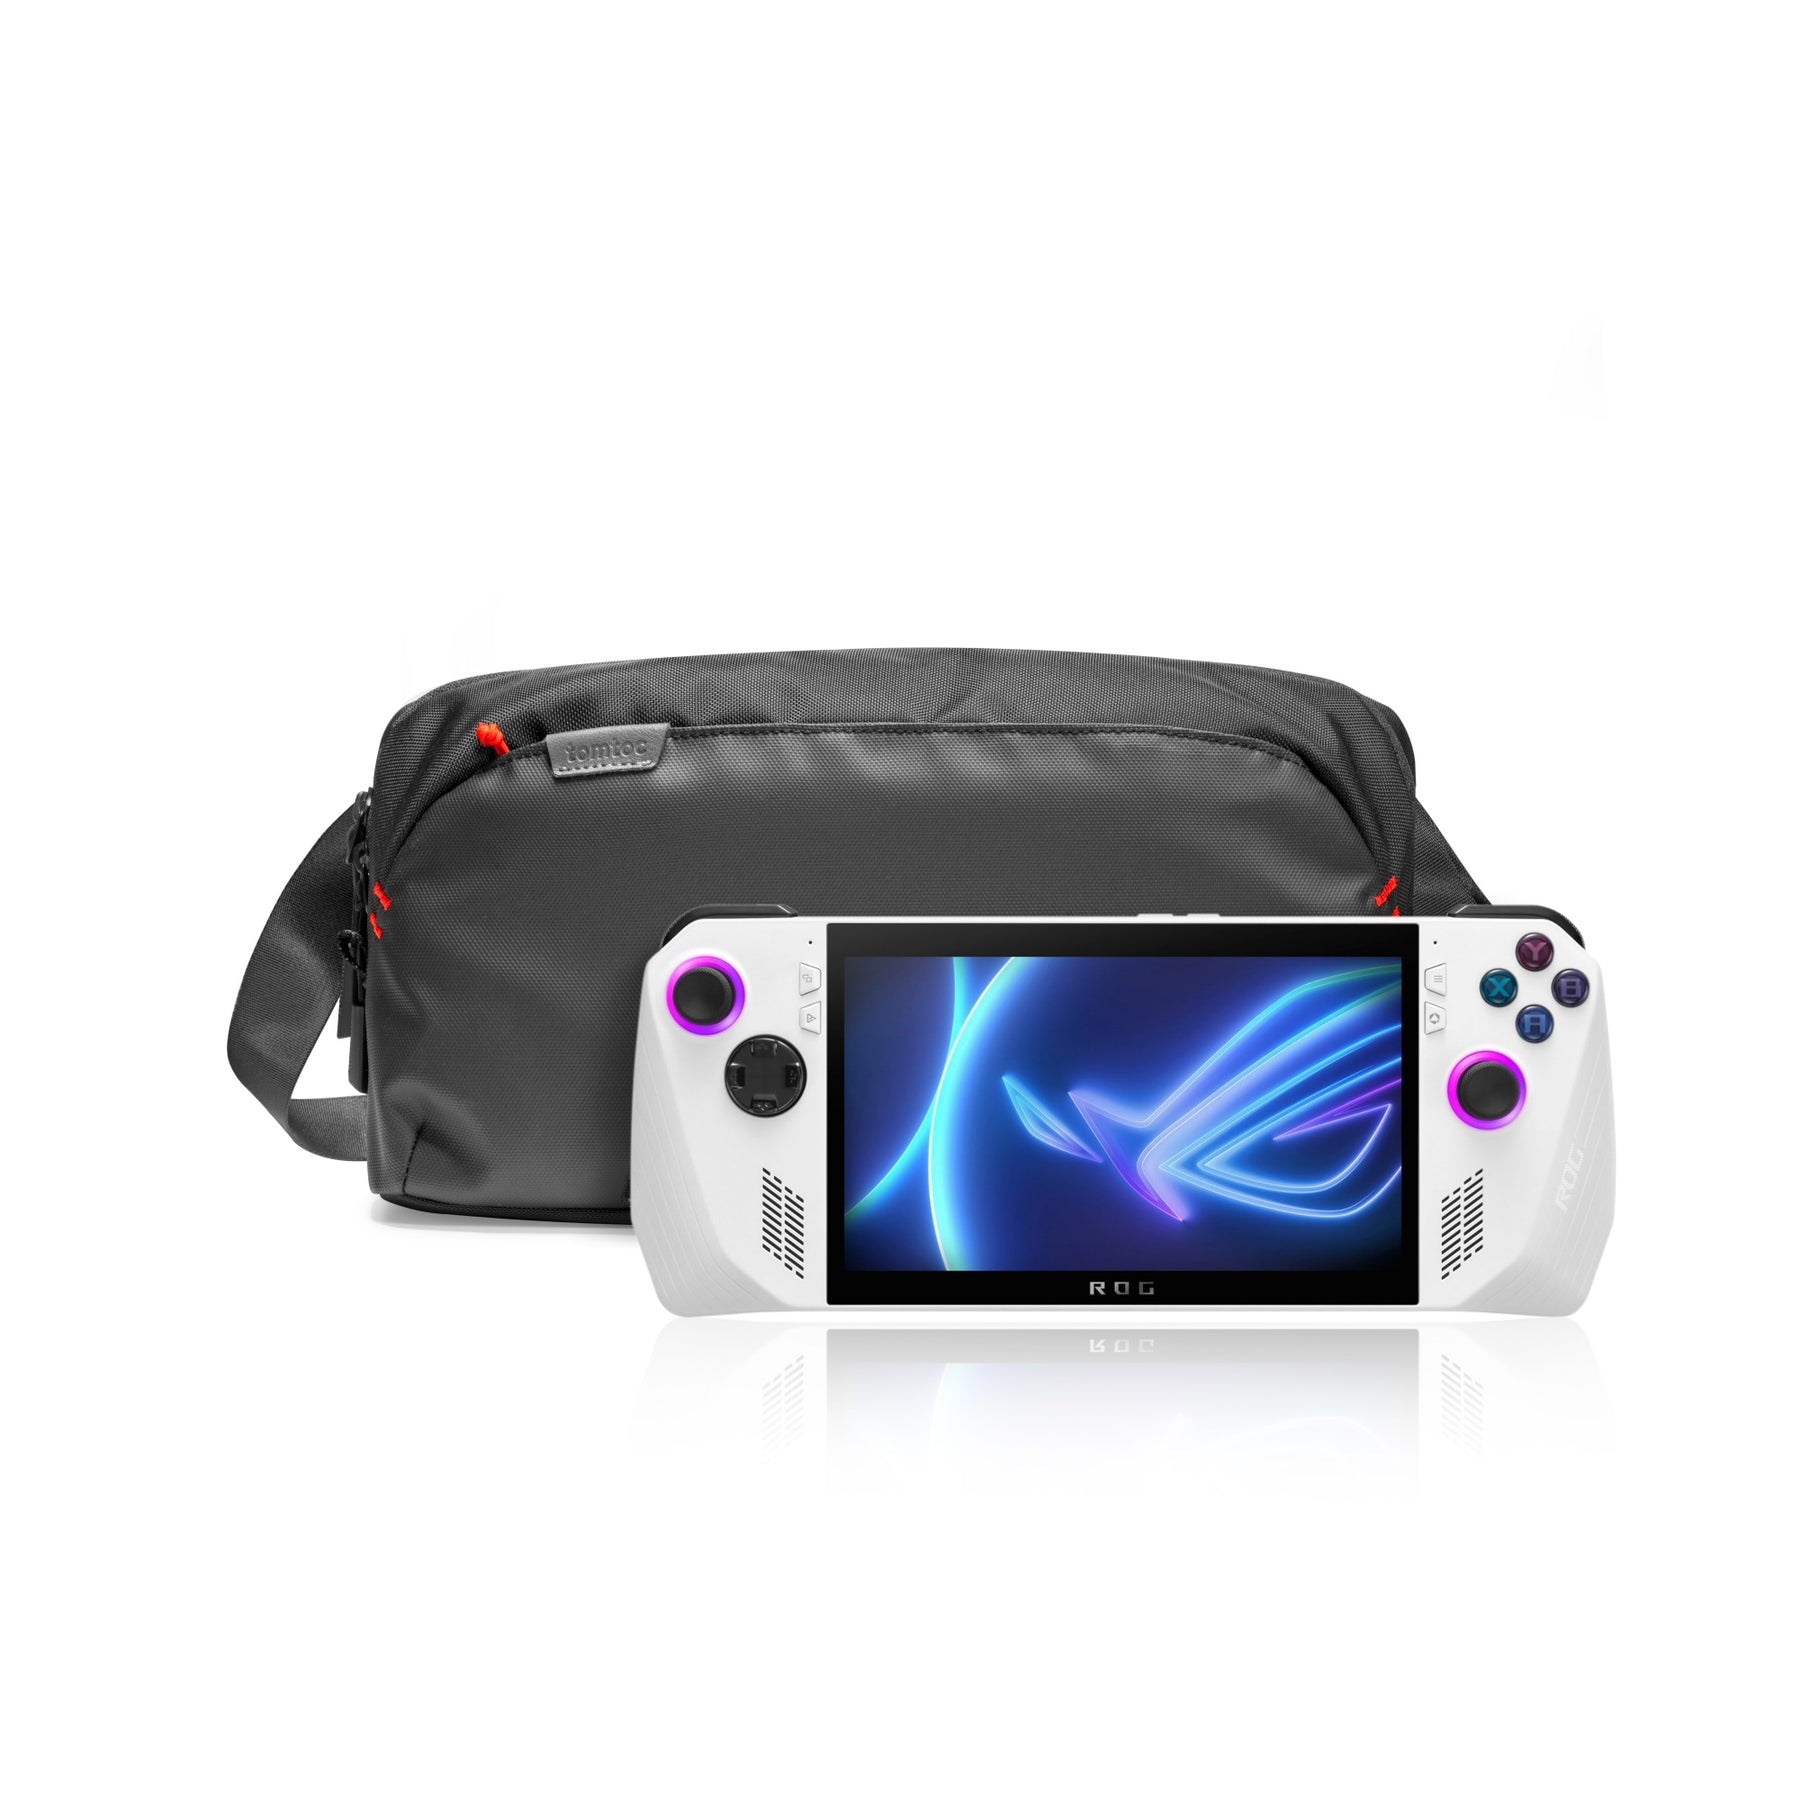 Carrying Case For Asus Rog Ally Gaming Handheld, Hard Eva Portable